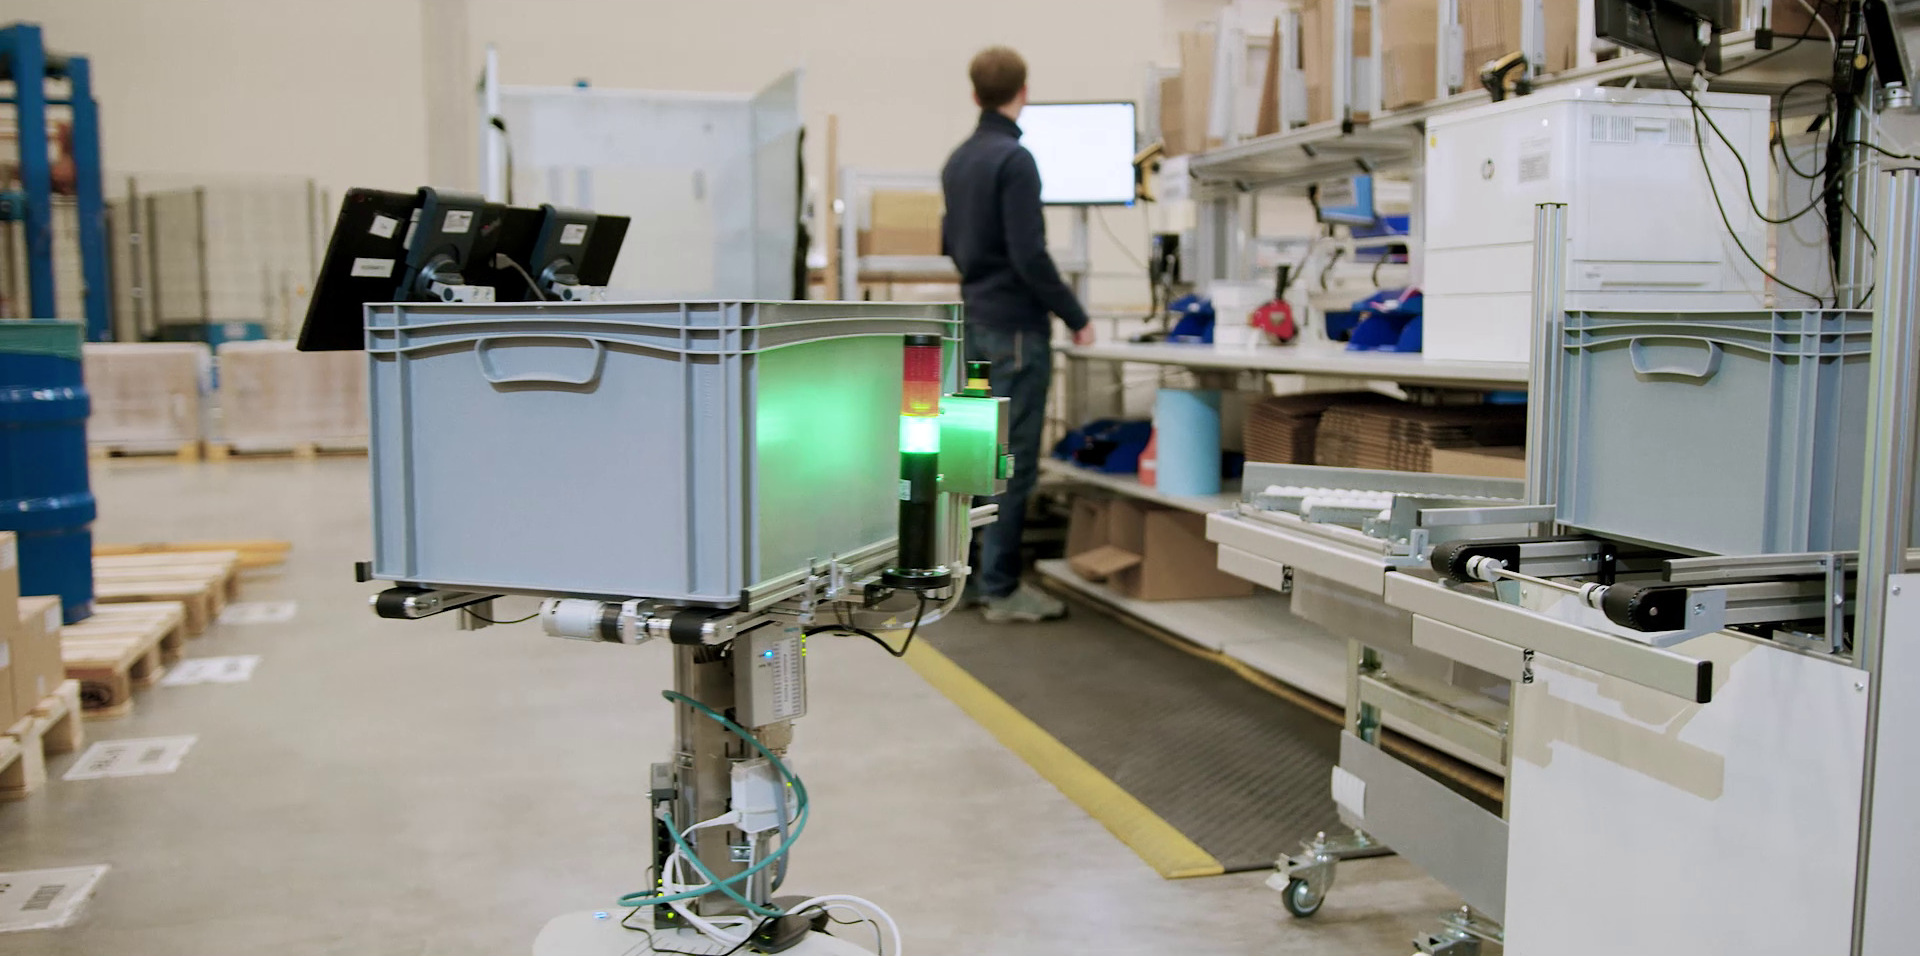 An autonomous mobile robot to support order picking